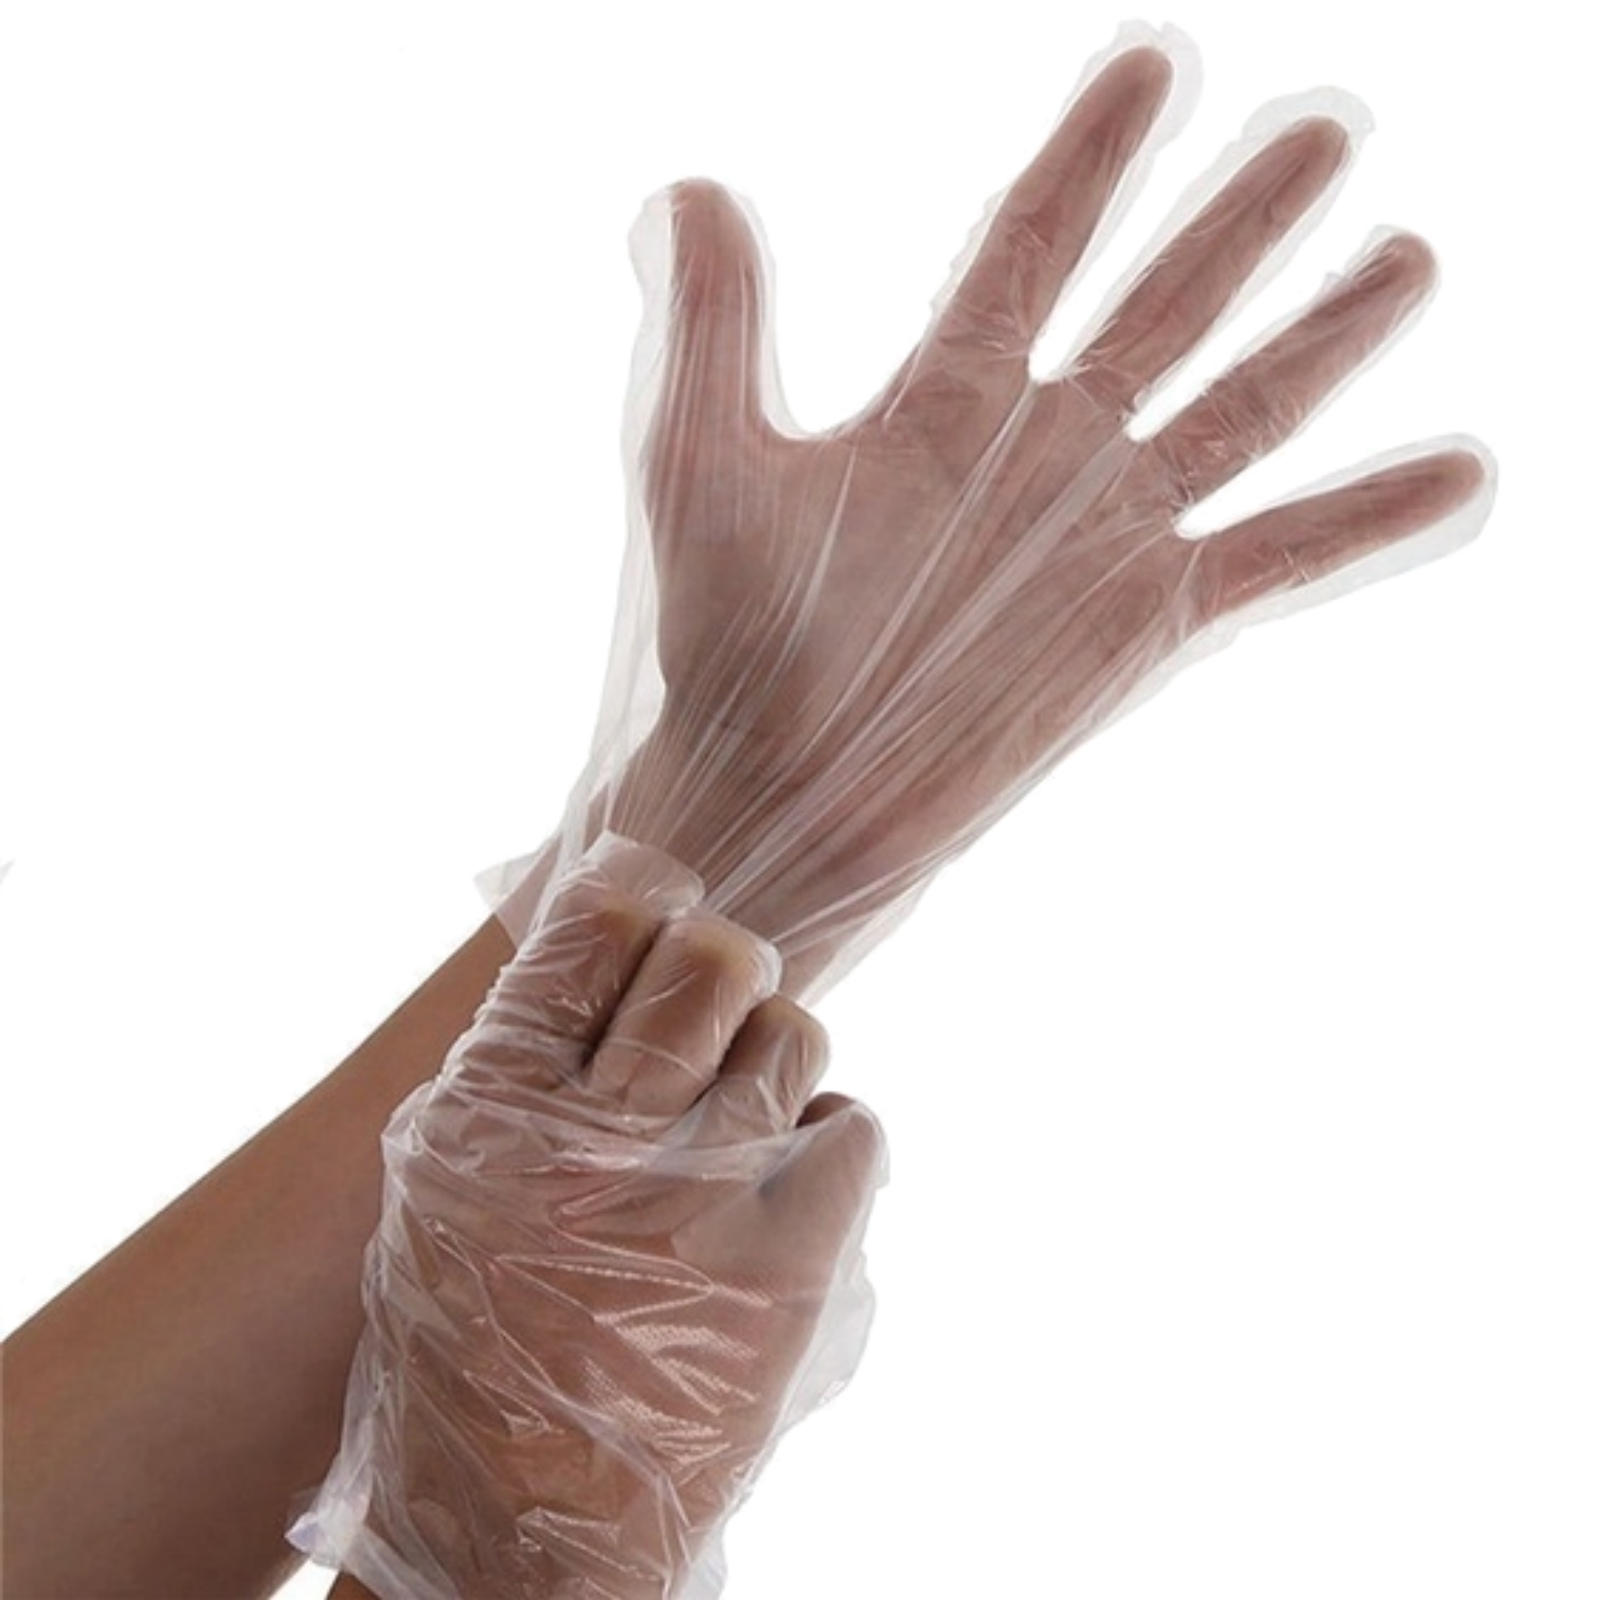 100pcs Healty Plastic Clear Gloves Food Cleaning Home Kitchen Catering BeautyUse 